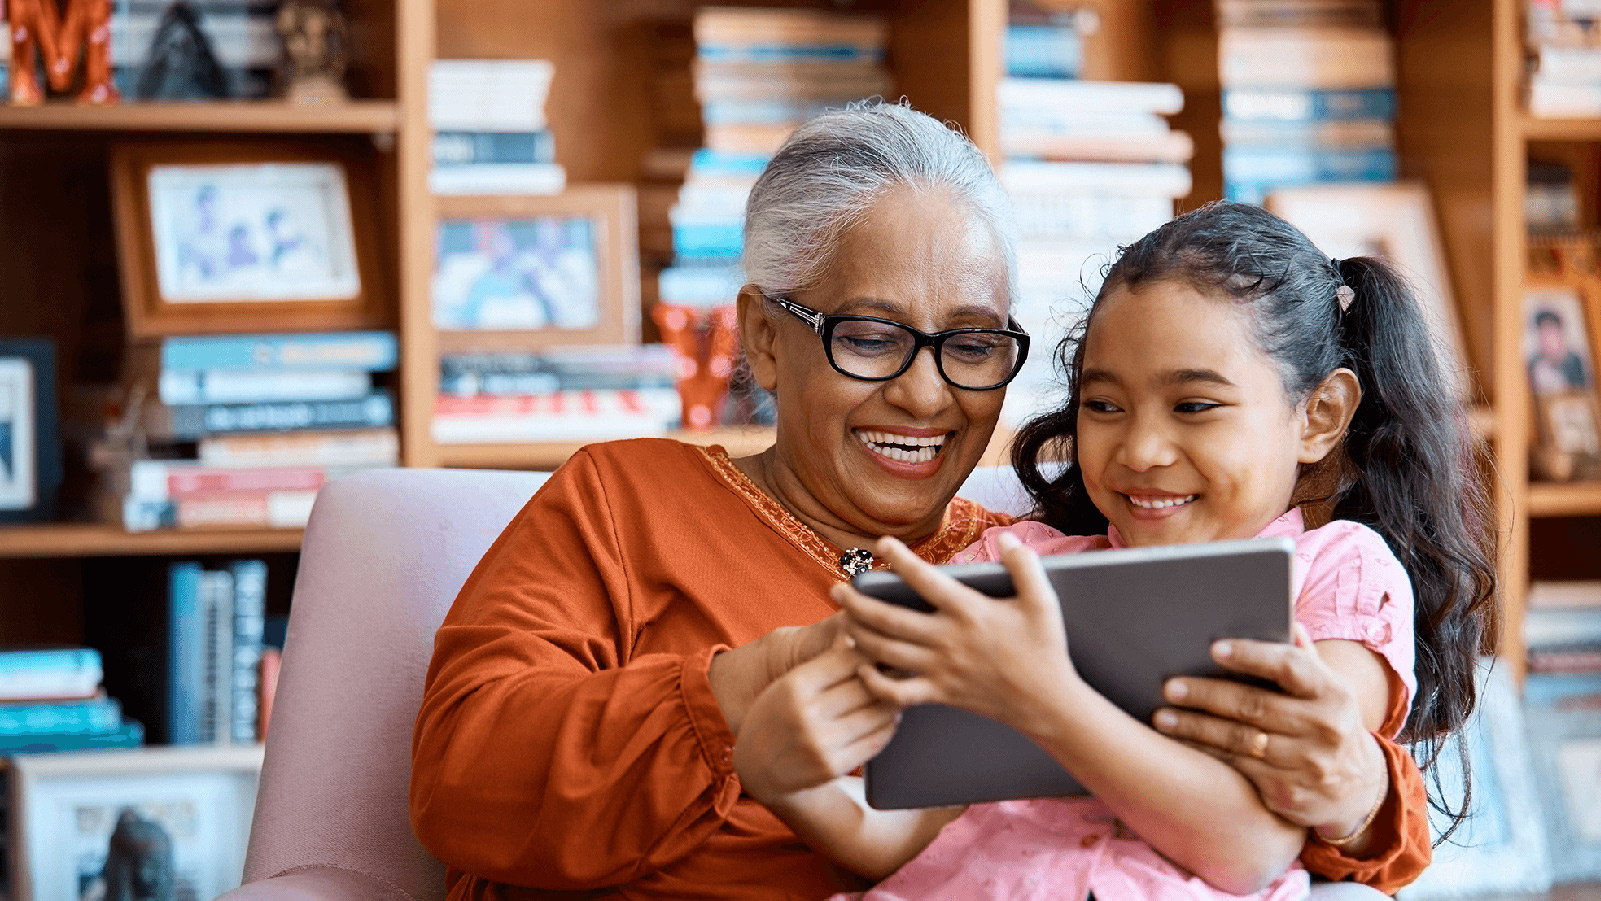 Grandma and her granddaughter smiling and looking at a tablet.